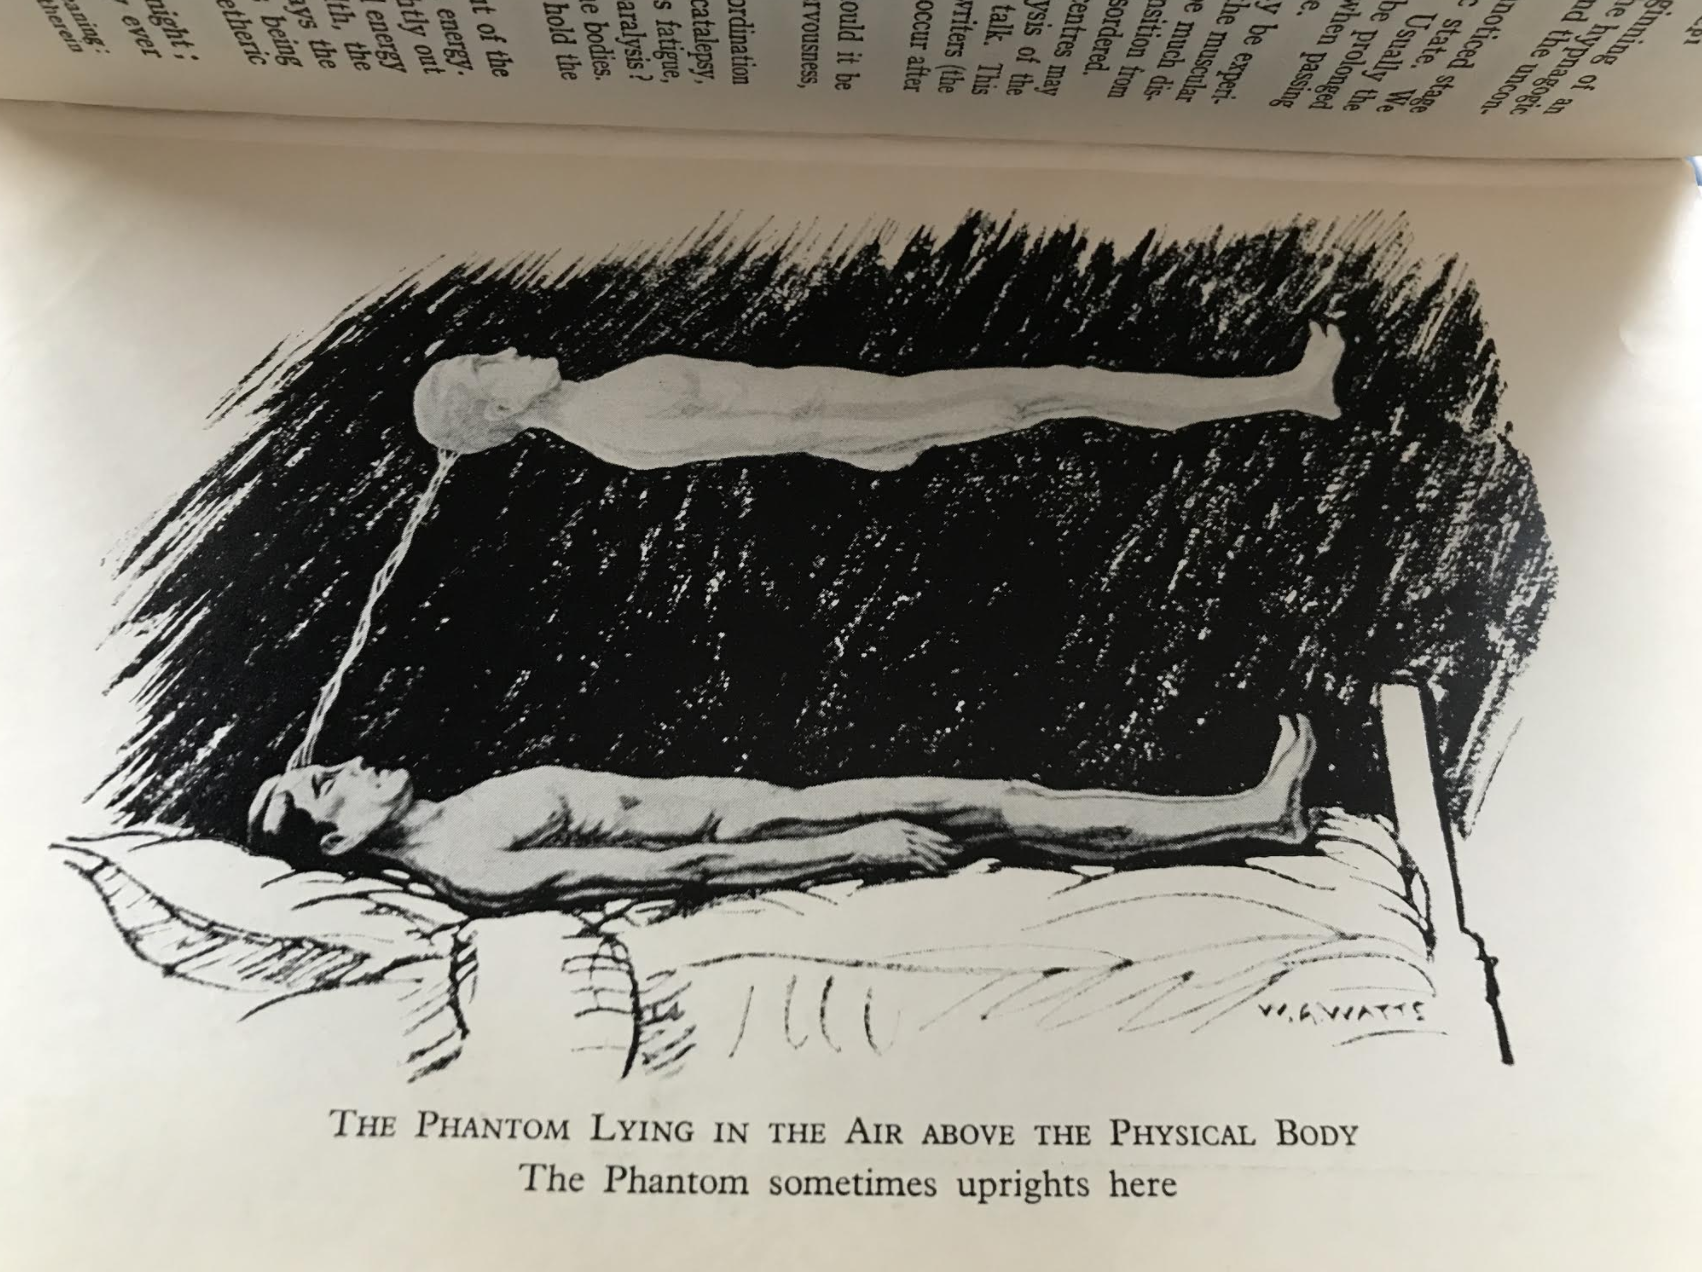 Astral Projection begins. From The Projection of the Astral Body, by Hereward Carrington and Sylvan Muldoon (1929).